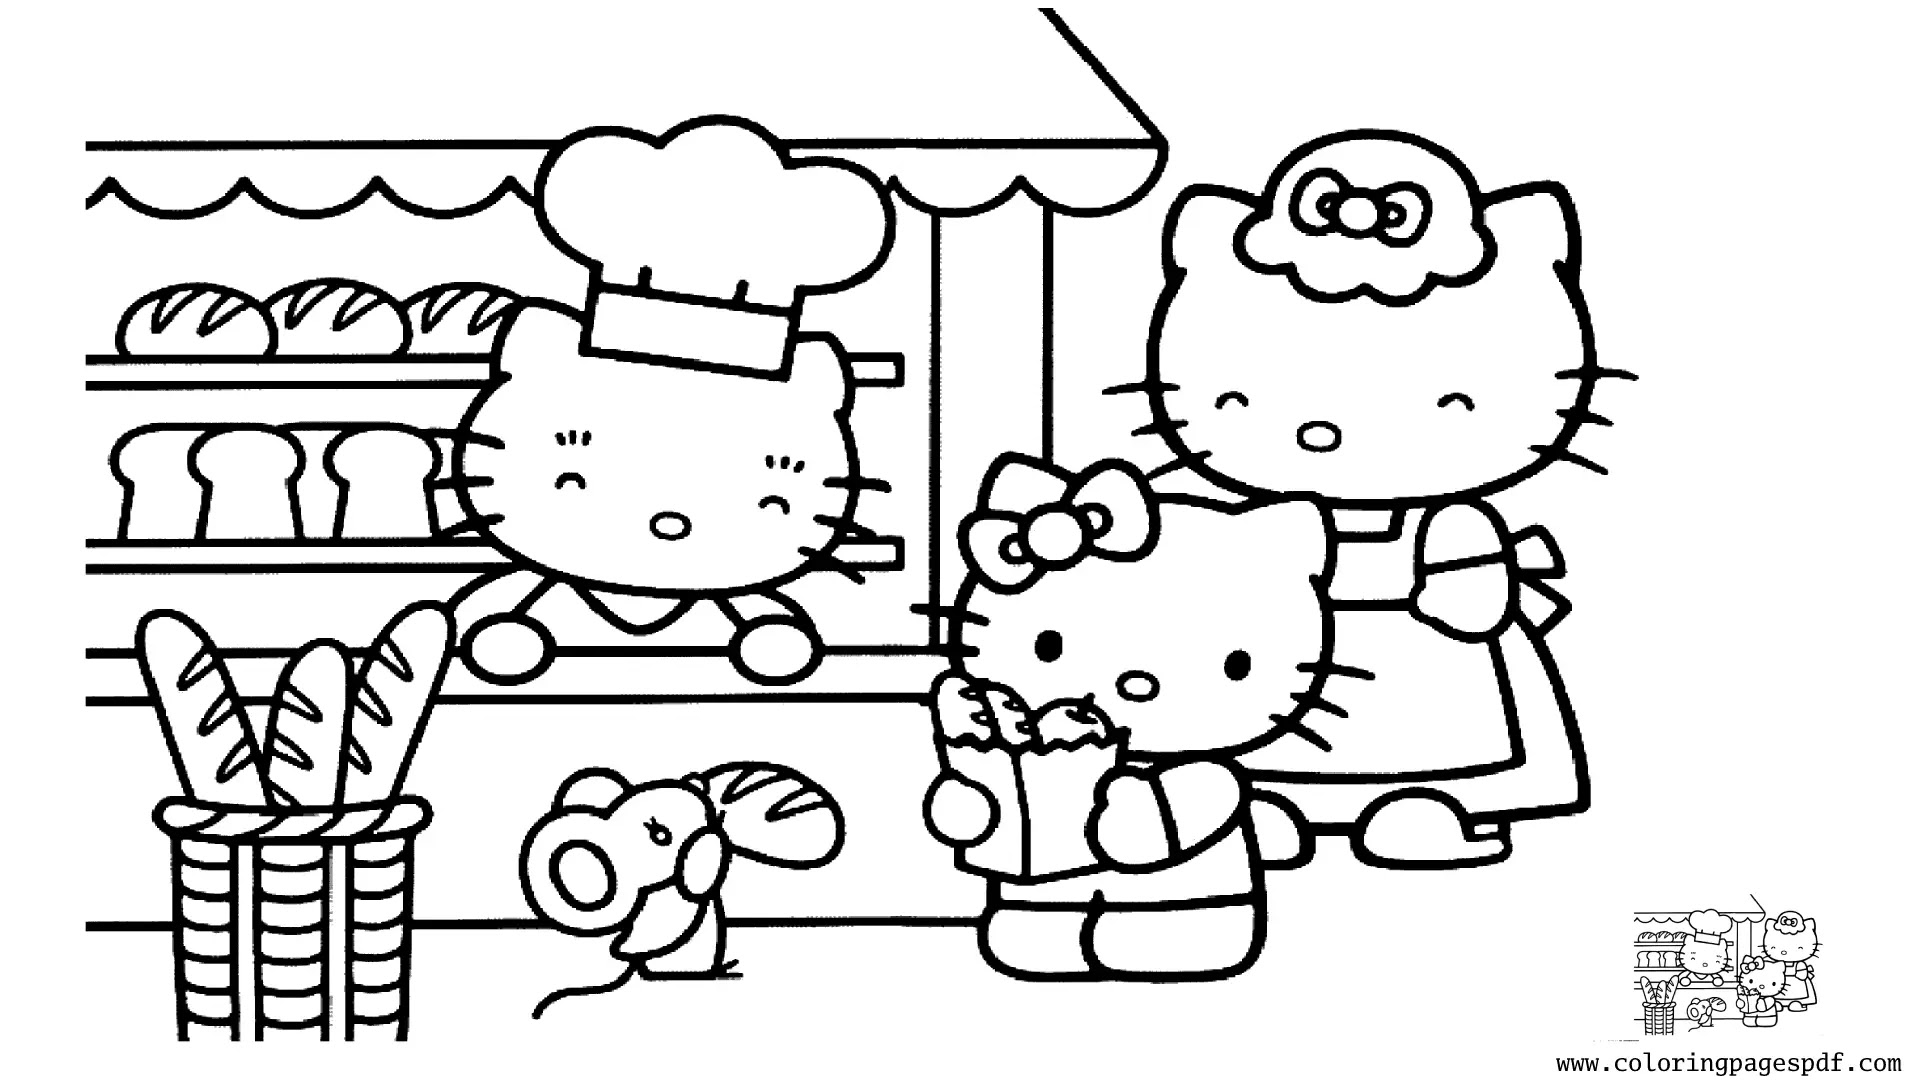 Coloring Page Of Hello Kitty Buying Bread With Her Mom